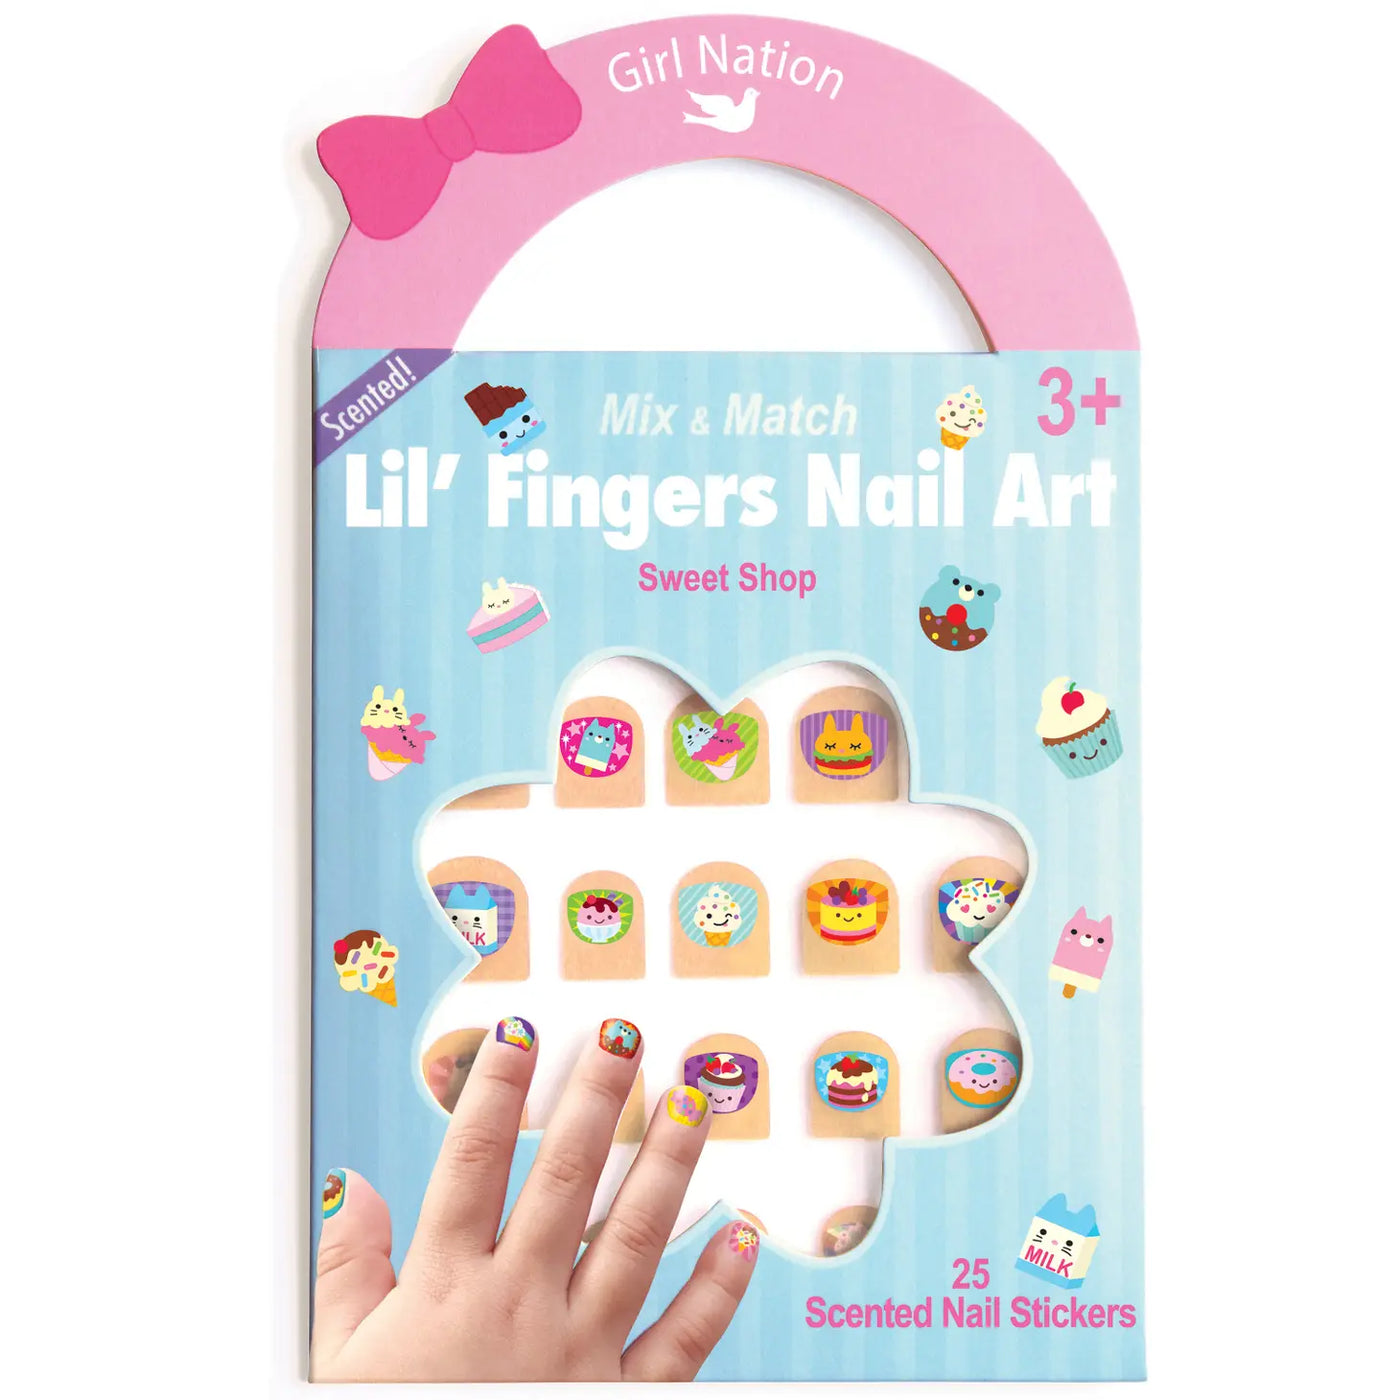 The Piggy Story - Lil' Fingers Nail Art Value Pack with Display